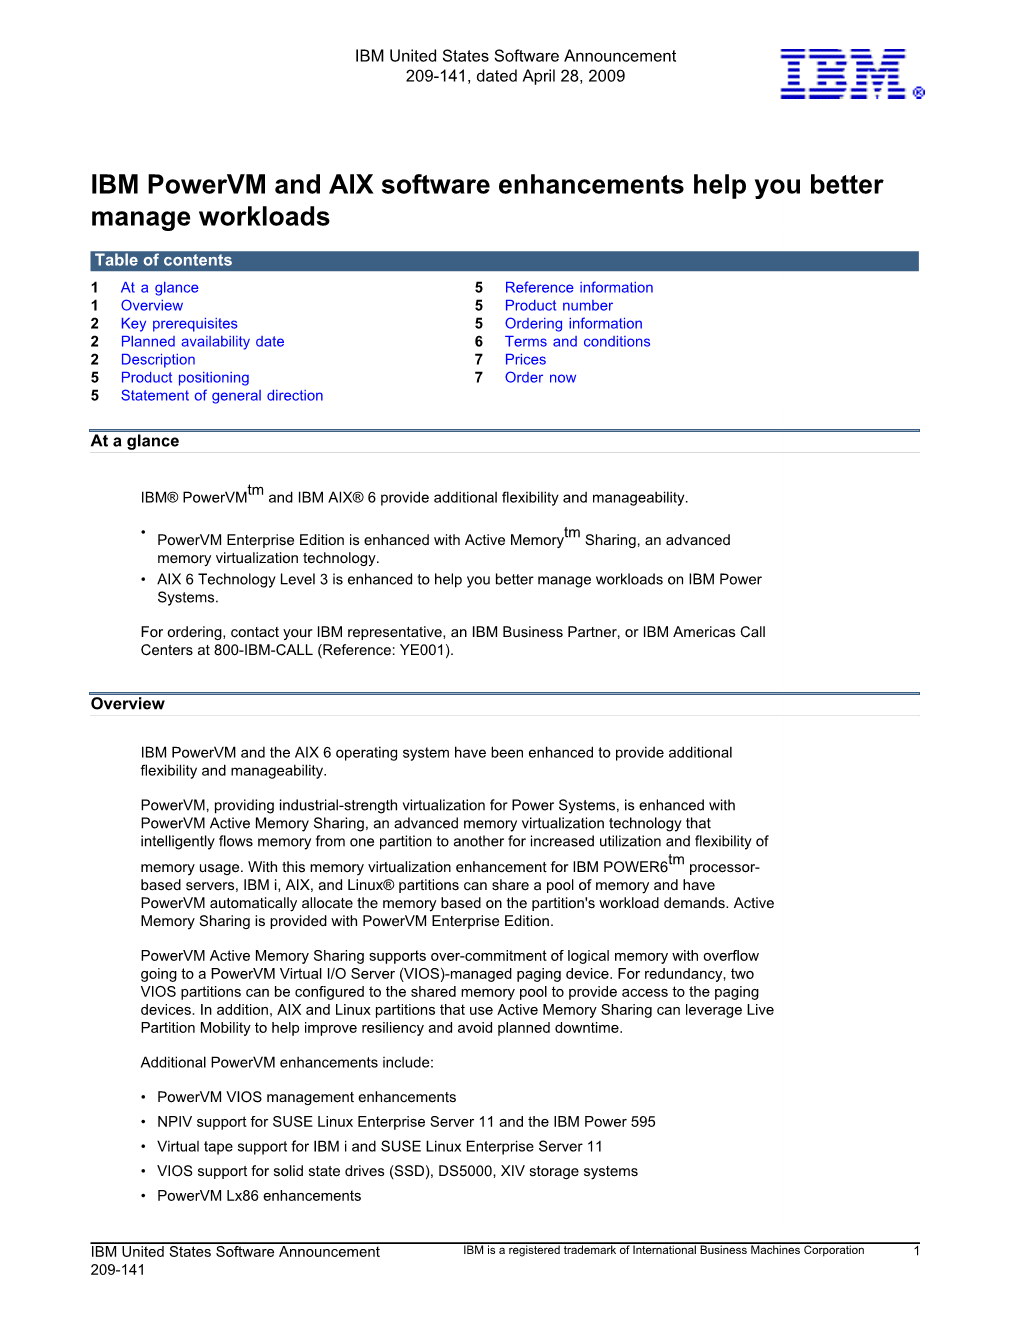 IBM Powervm and AIX Software Enhancements Help You Better Manage Workloads